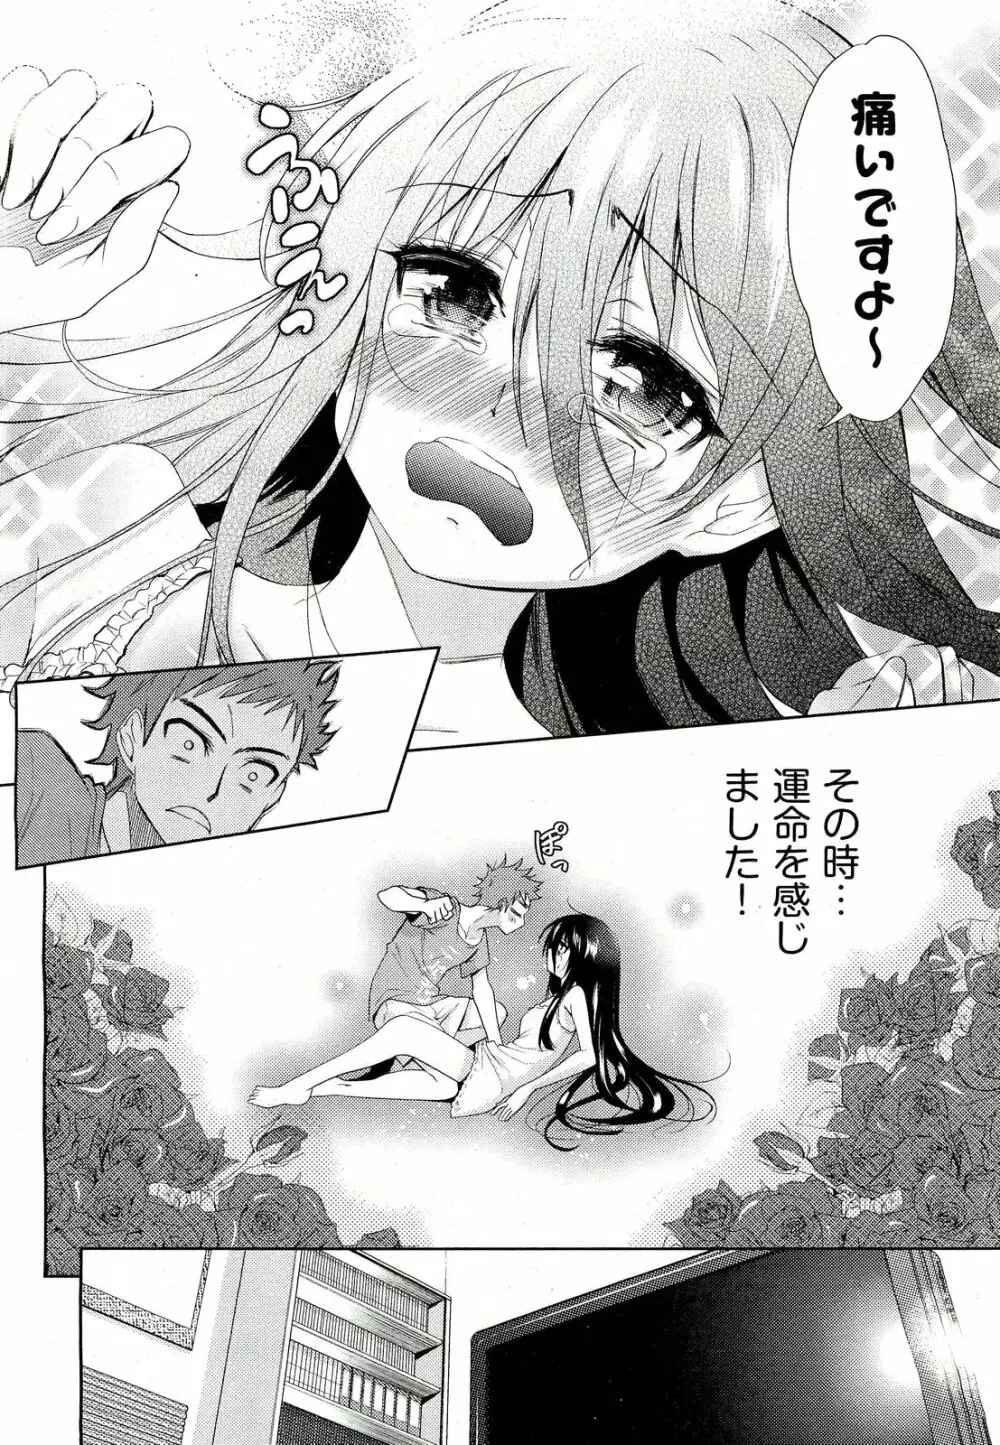 Two dimensions girlfriend Ch.1-4 4ページ